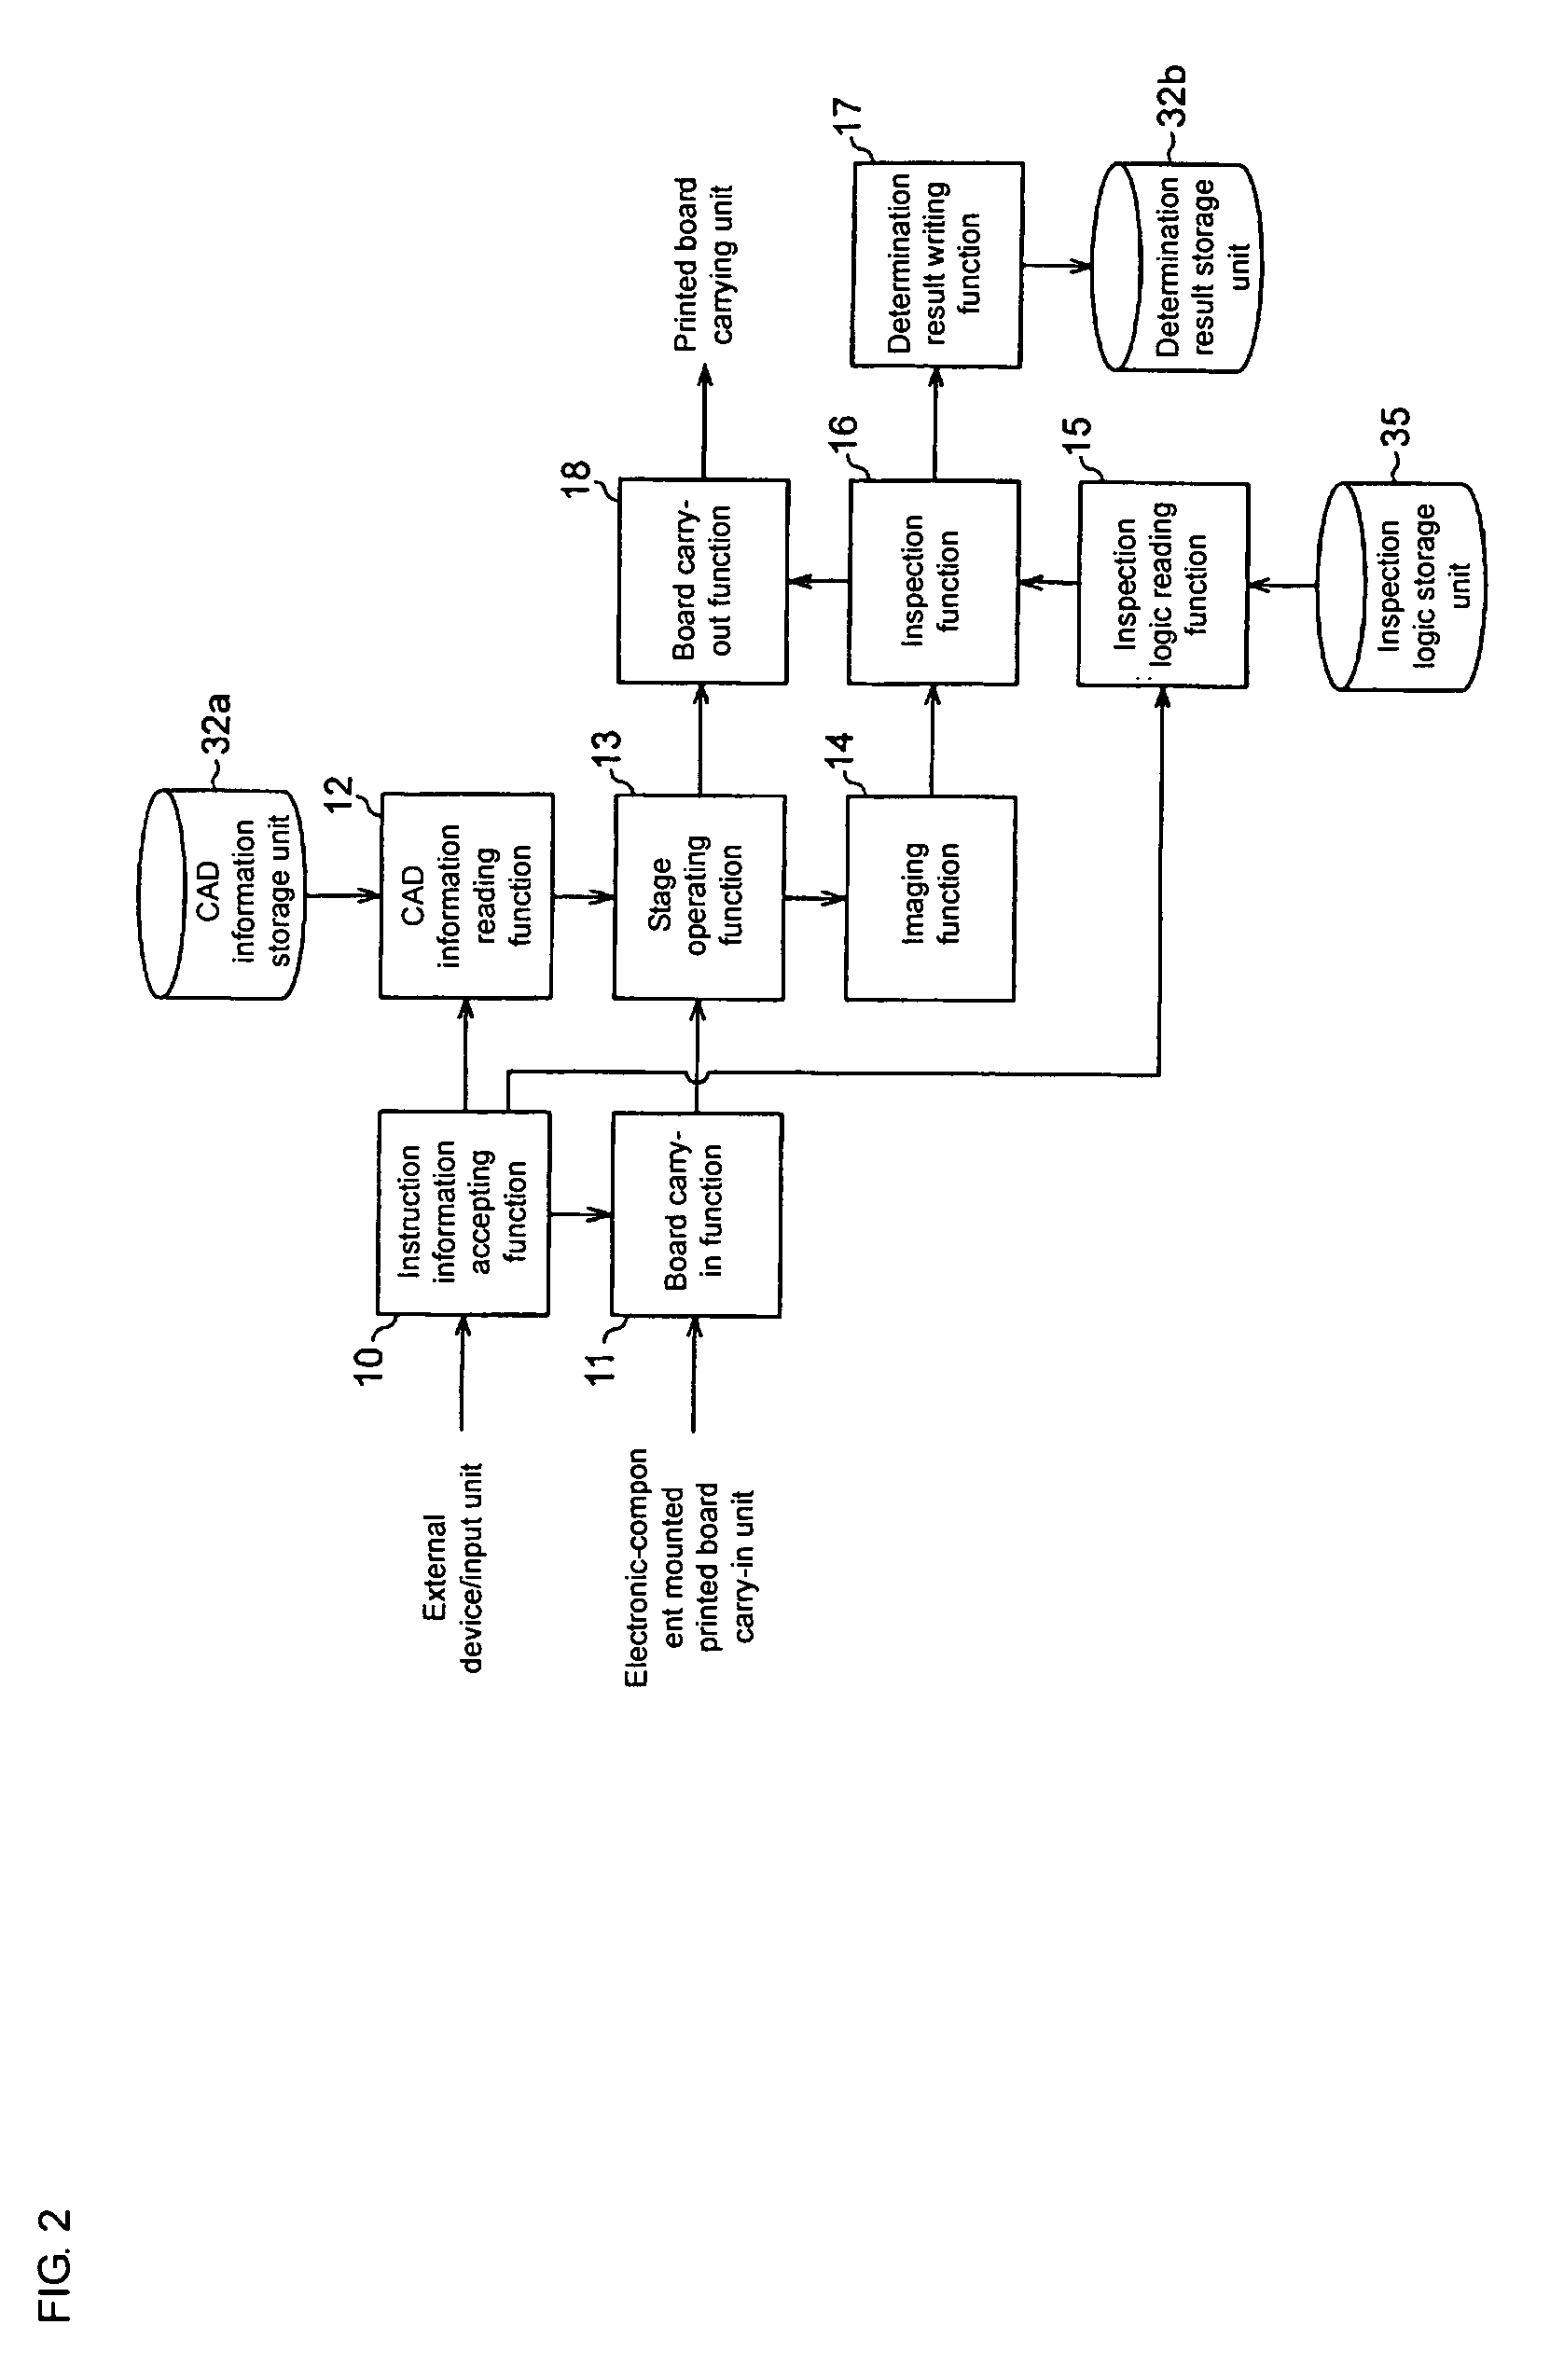 Board inspection apparatus and method and apparatus for setting inspection logic thereof